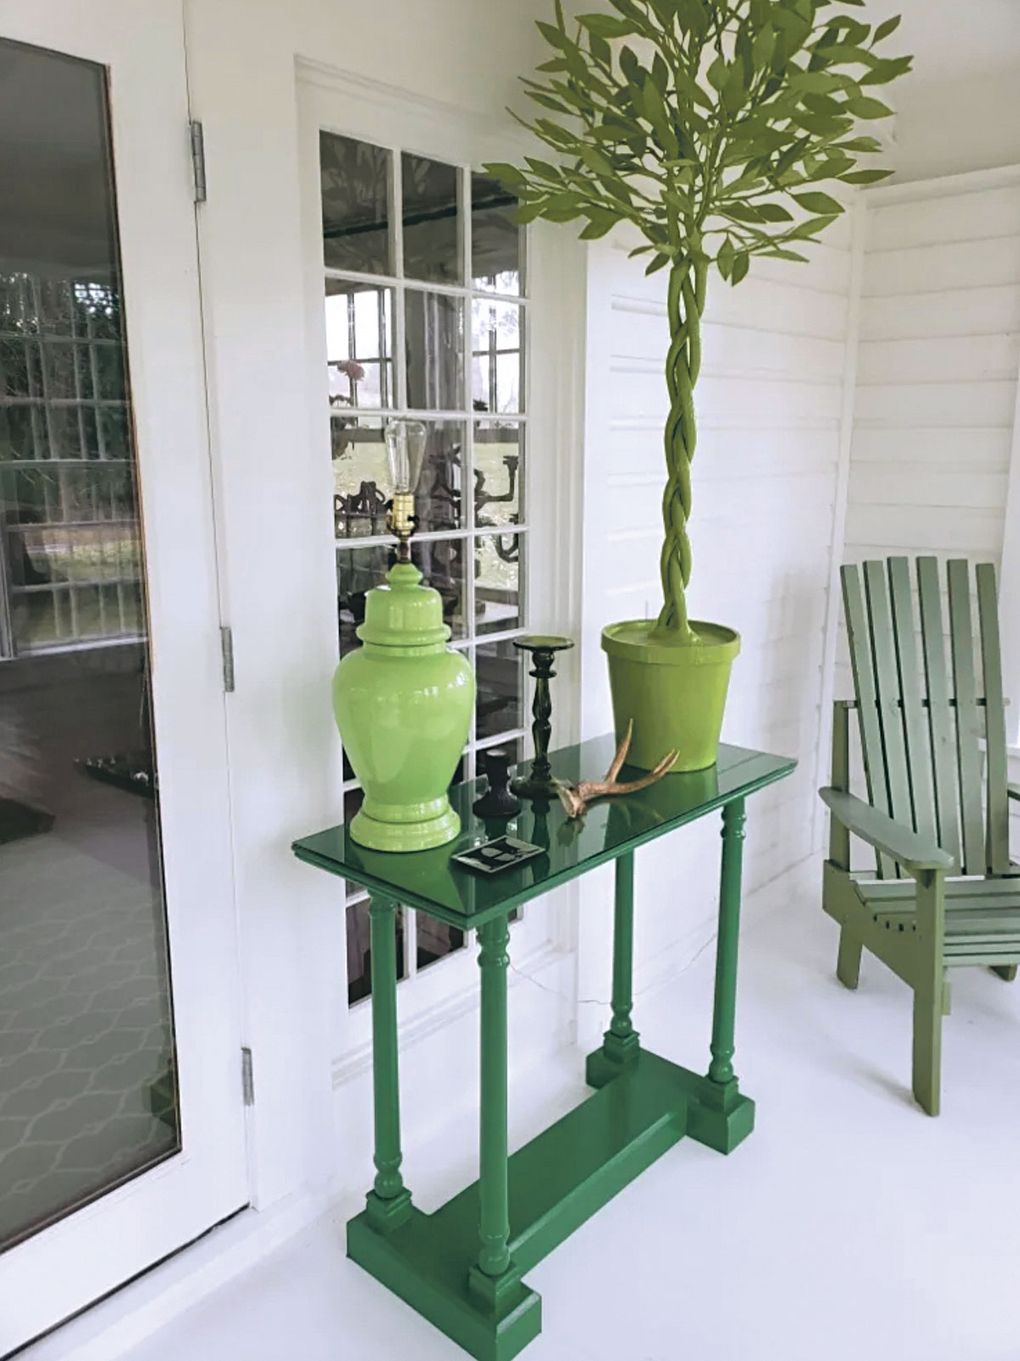 Outdoor decorations can create a welcoming vibe for holiday guests. Ted Kennedy Watson says his enclosed front porch has become one of his favorite areas to decorate. (Courtesy of Watson Kennedy Fine Home)